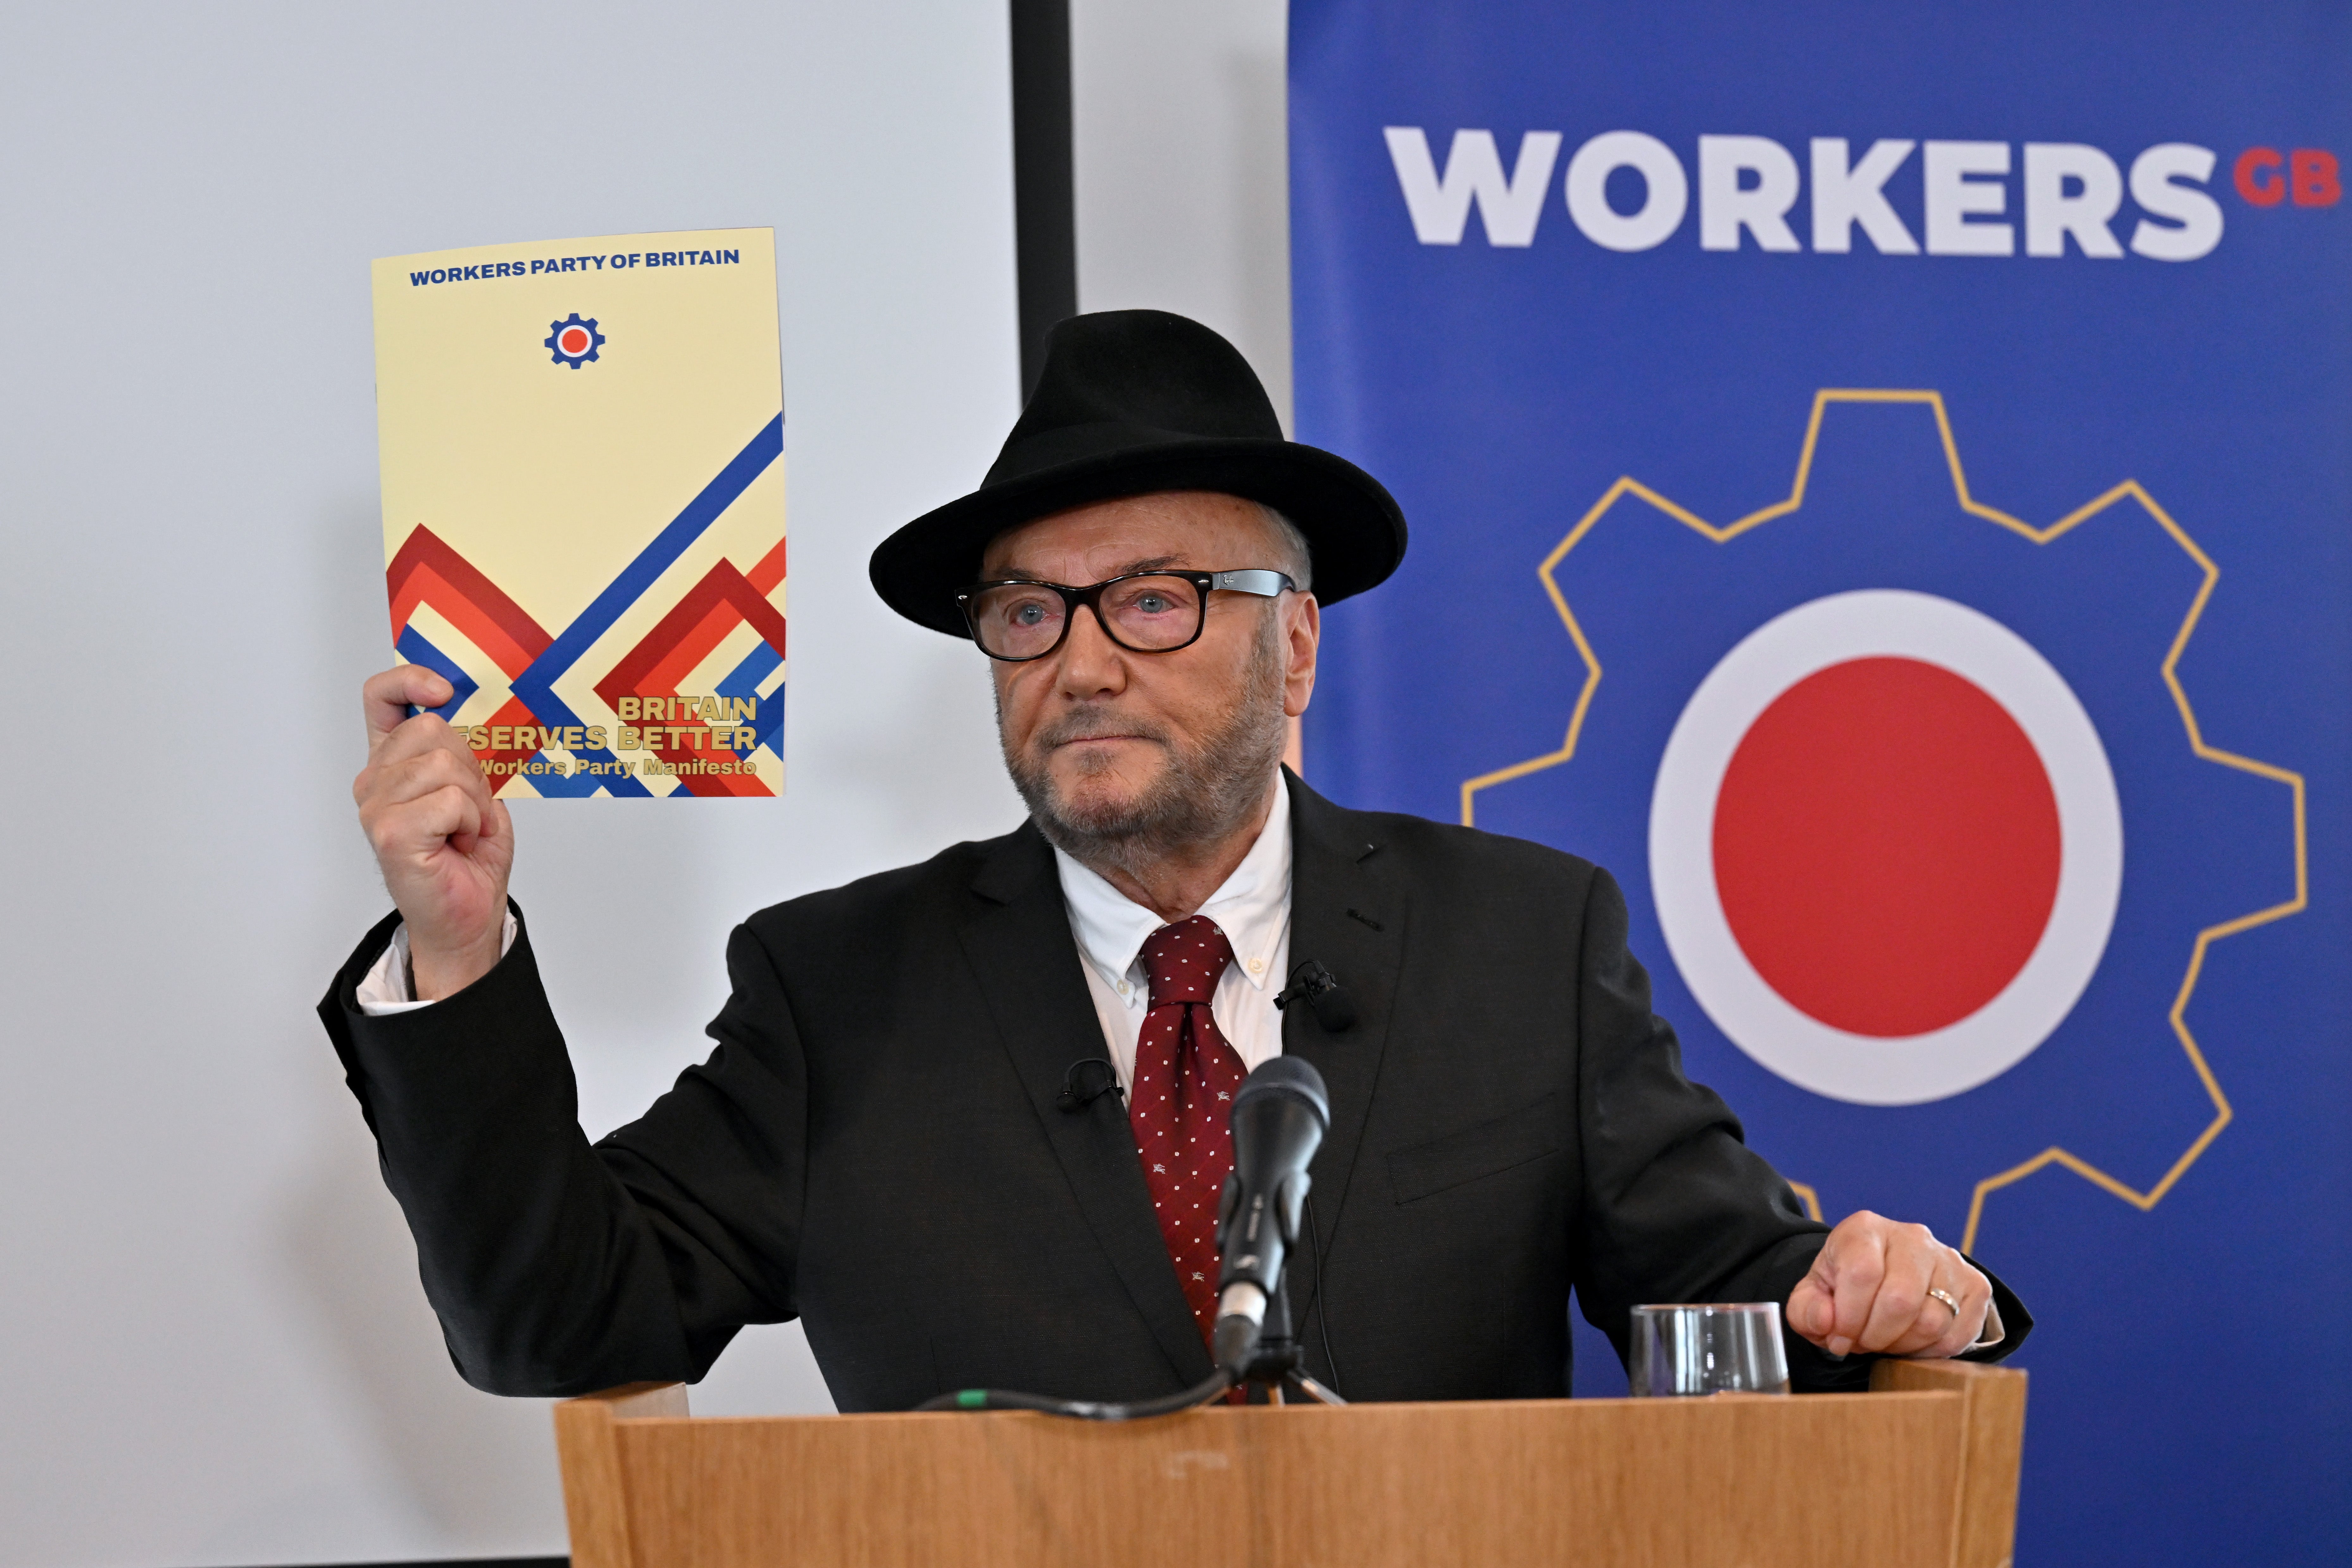 Leader of the Workers Party of Britain George Galloway holds a copy of the manifesto during his party’s manifesto launch on Wednesday